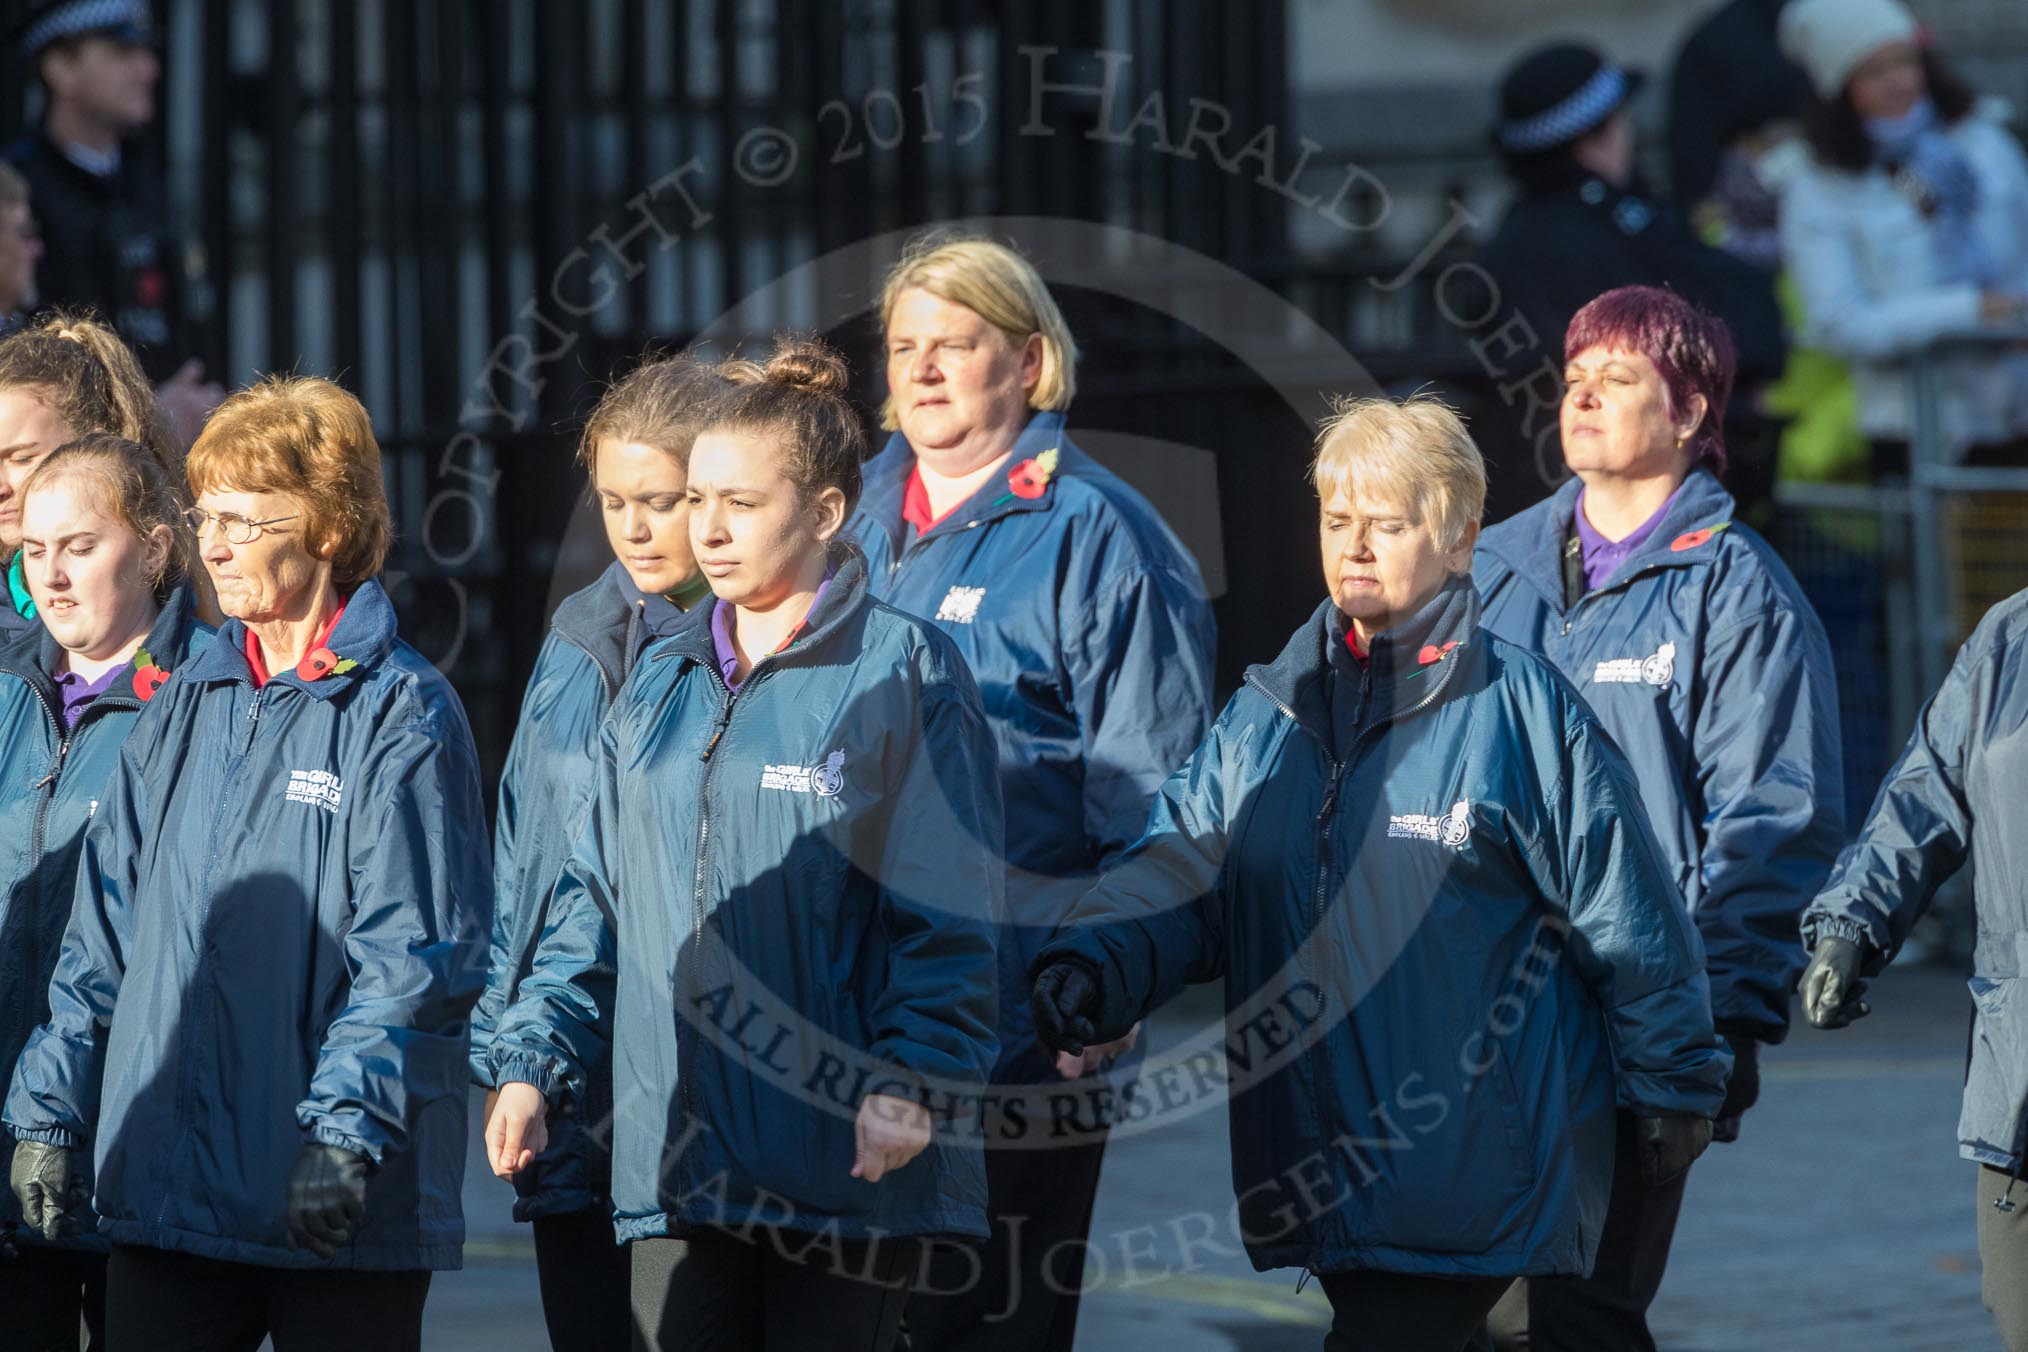 March Past, Remembrance Sunday at the Cenotaph 2016: M35 Girls Brigade England & Wales.
Cenotaph, Whitehall, London SW1,
London,
Greater London,
United Kingdom,
on 13 November 2016 at 13:18, image #2875